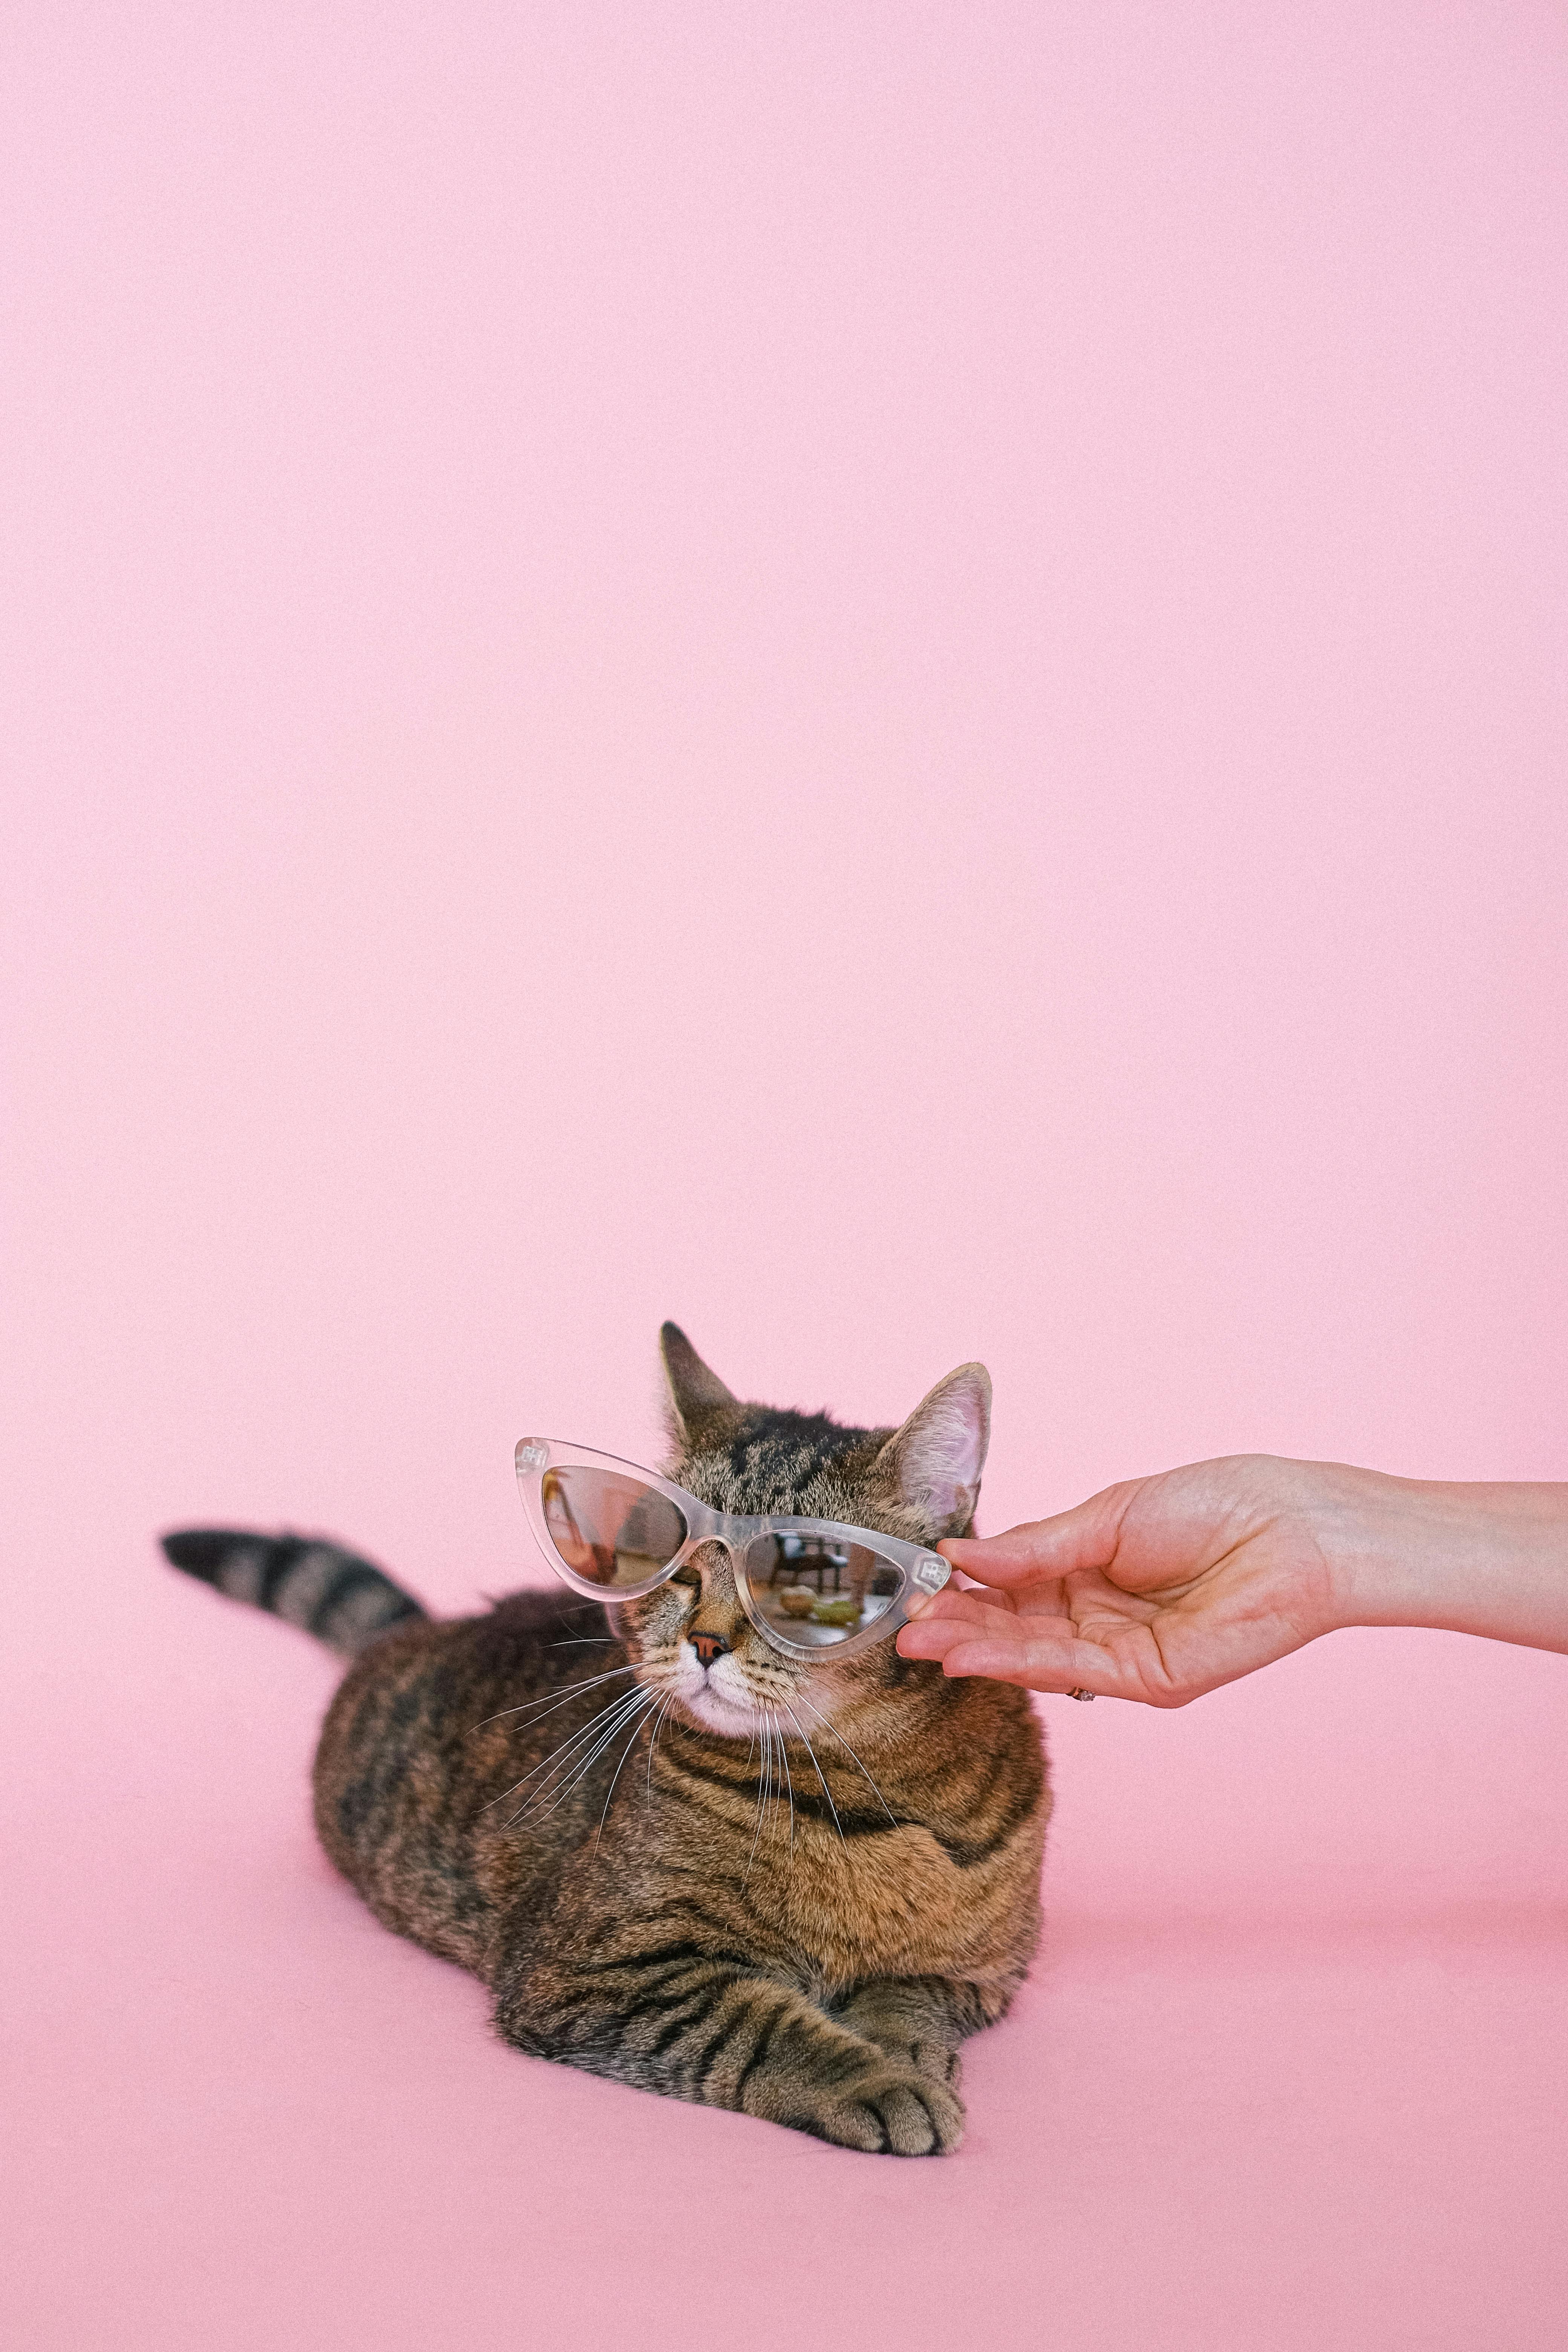 black cat making angry face showing teeth on pink background, Stock image